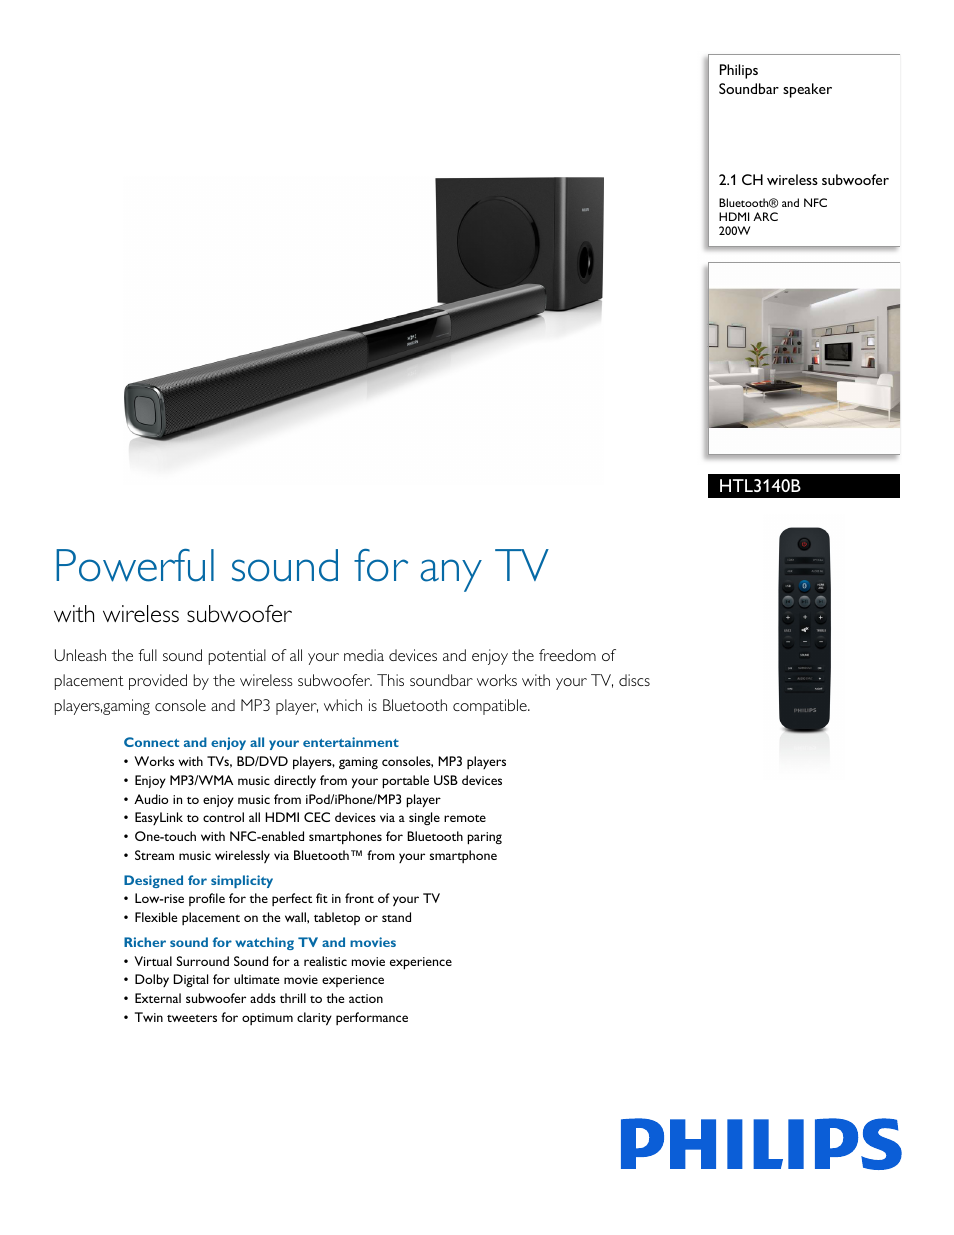 Philips Soundbar speaker HTL3140B 2.1 CH wireless subwoofer Bluetooth® and  NFC HDMI ARC 200W User Manual | 3 pages